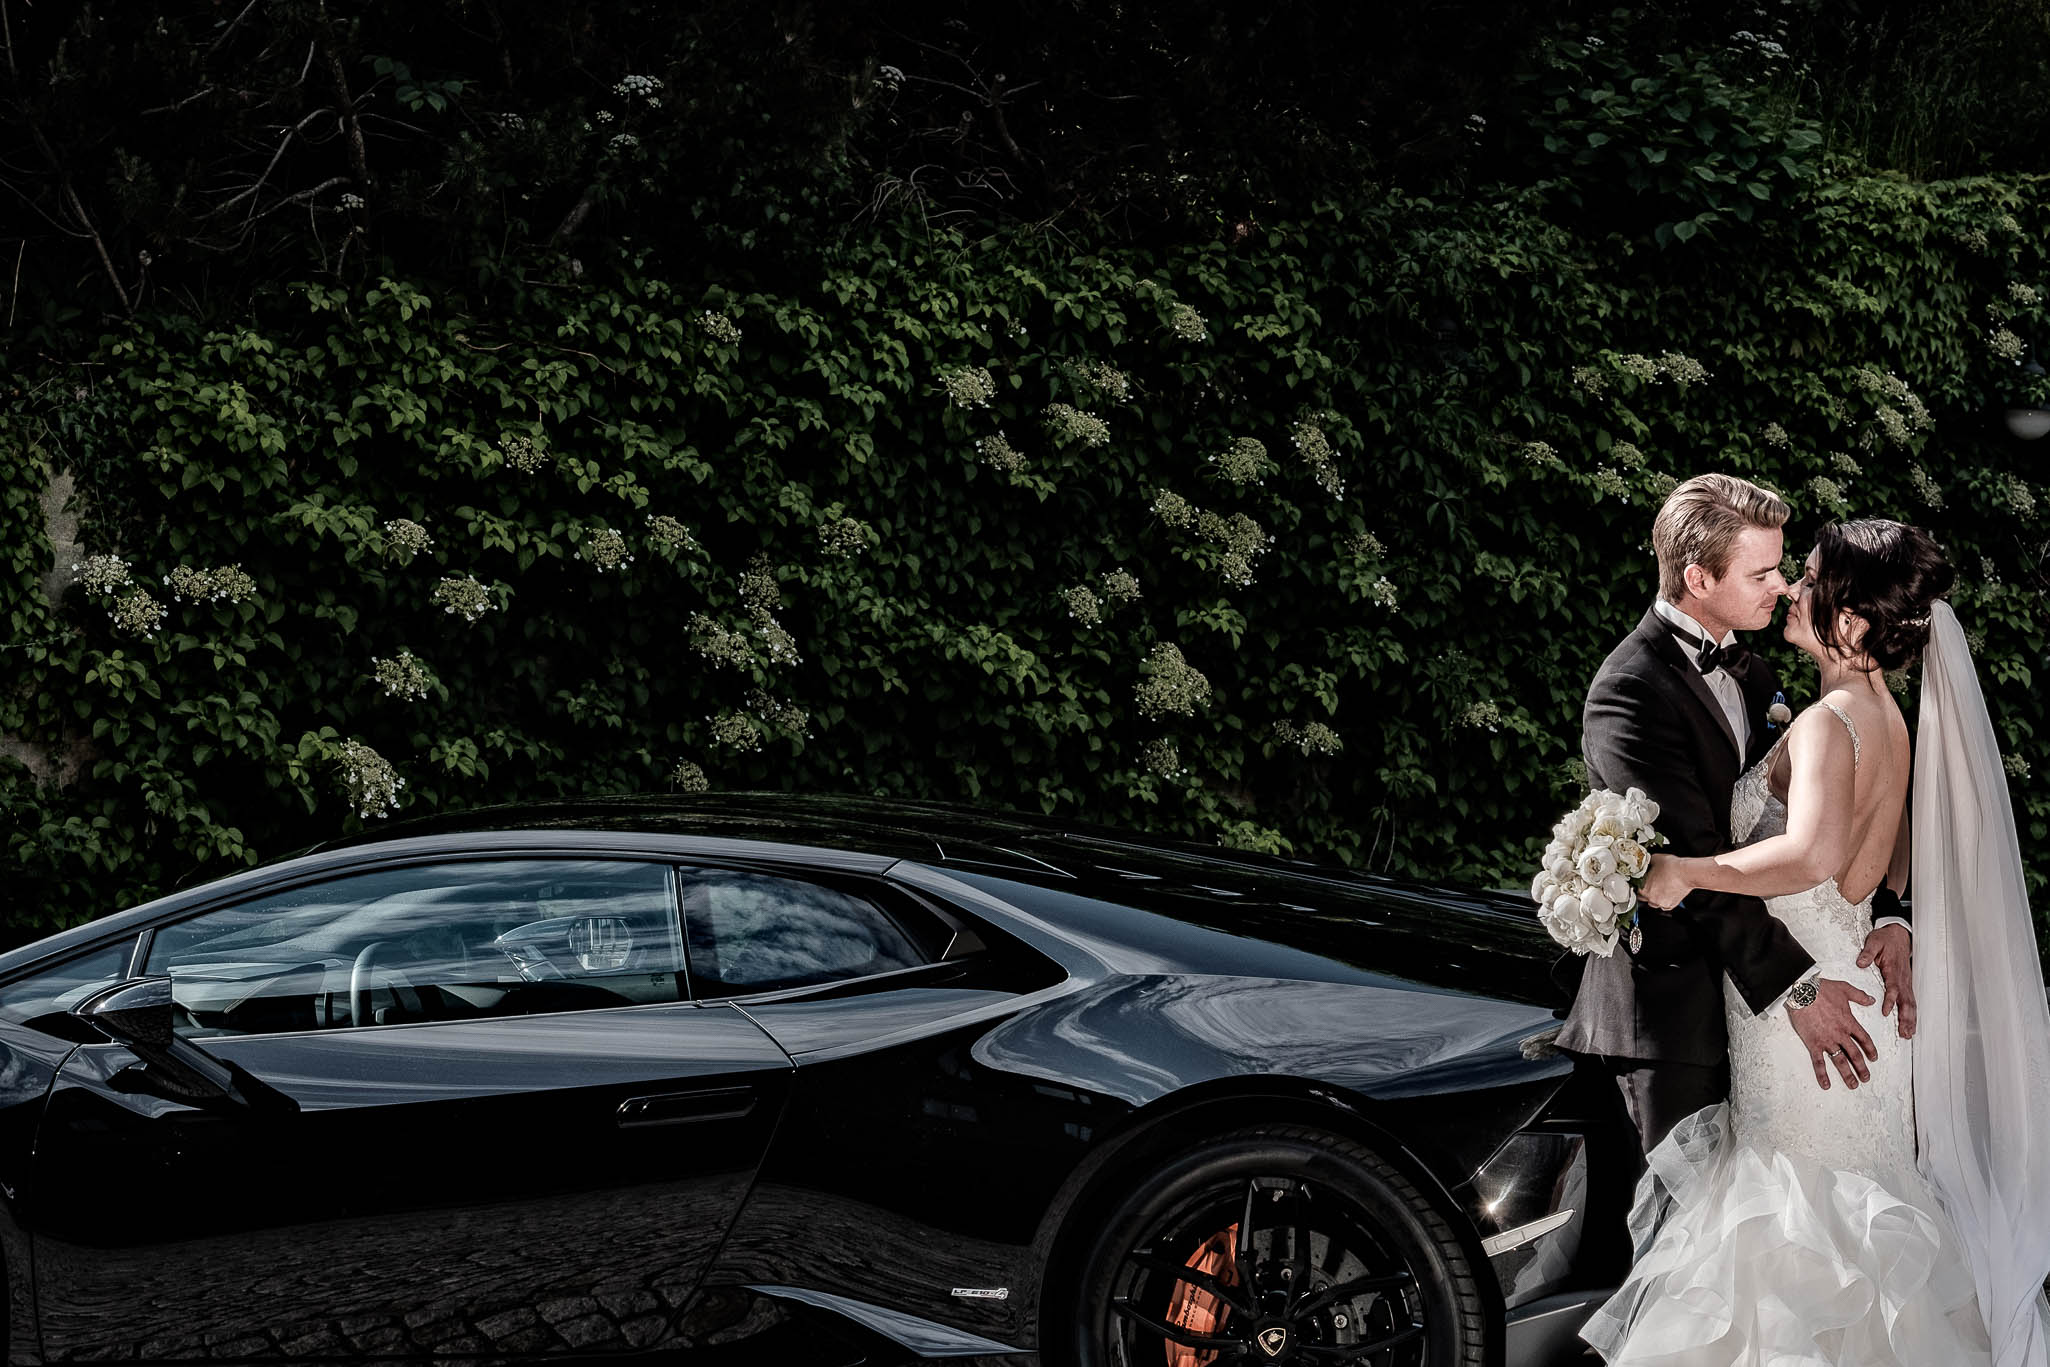 Click to enlarge image linnchristin-andreas-hallsnas-ottossonphoto-1028.jpg